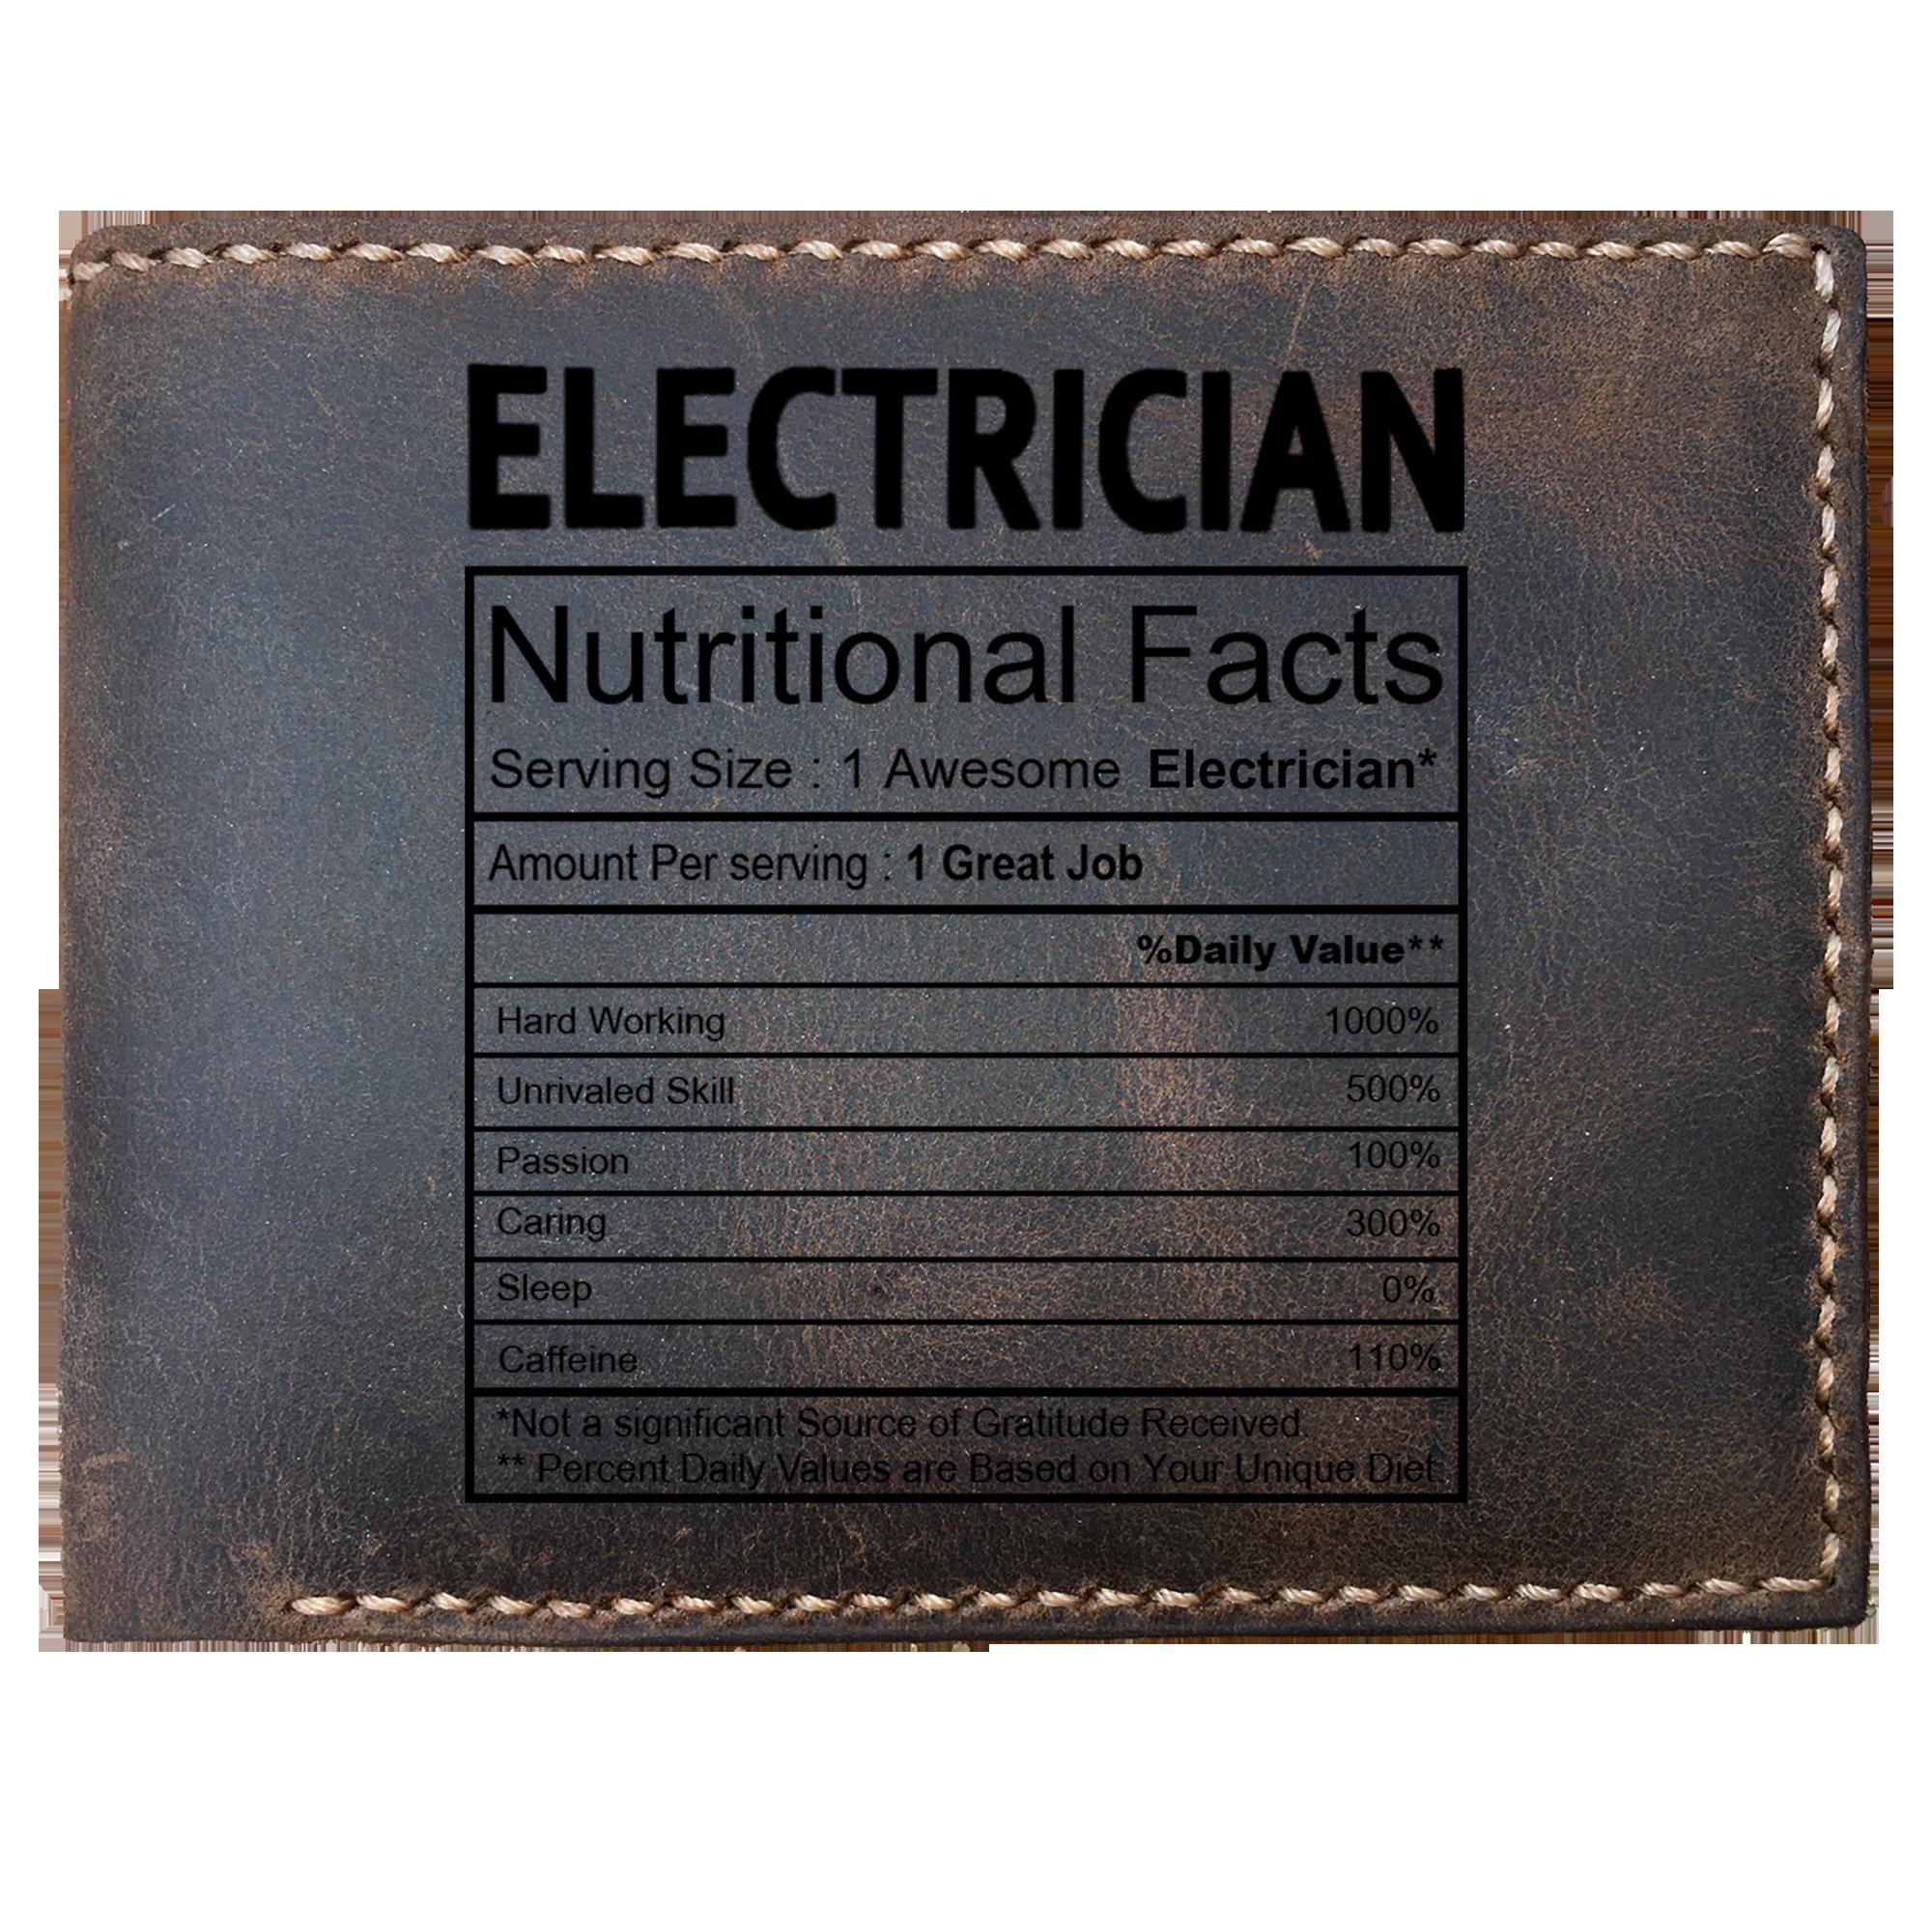 Skitongifts Funny Custom Laser Engraved Bifold Leather Wallet For Men, Electrician Nutritional Facts